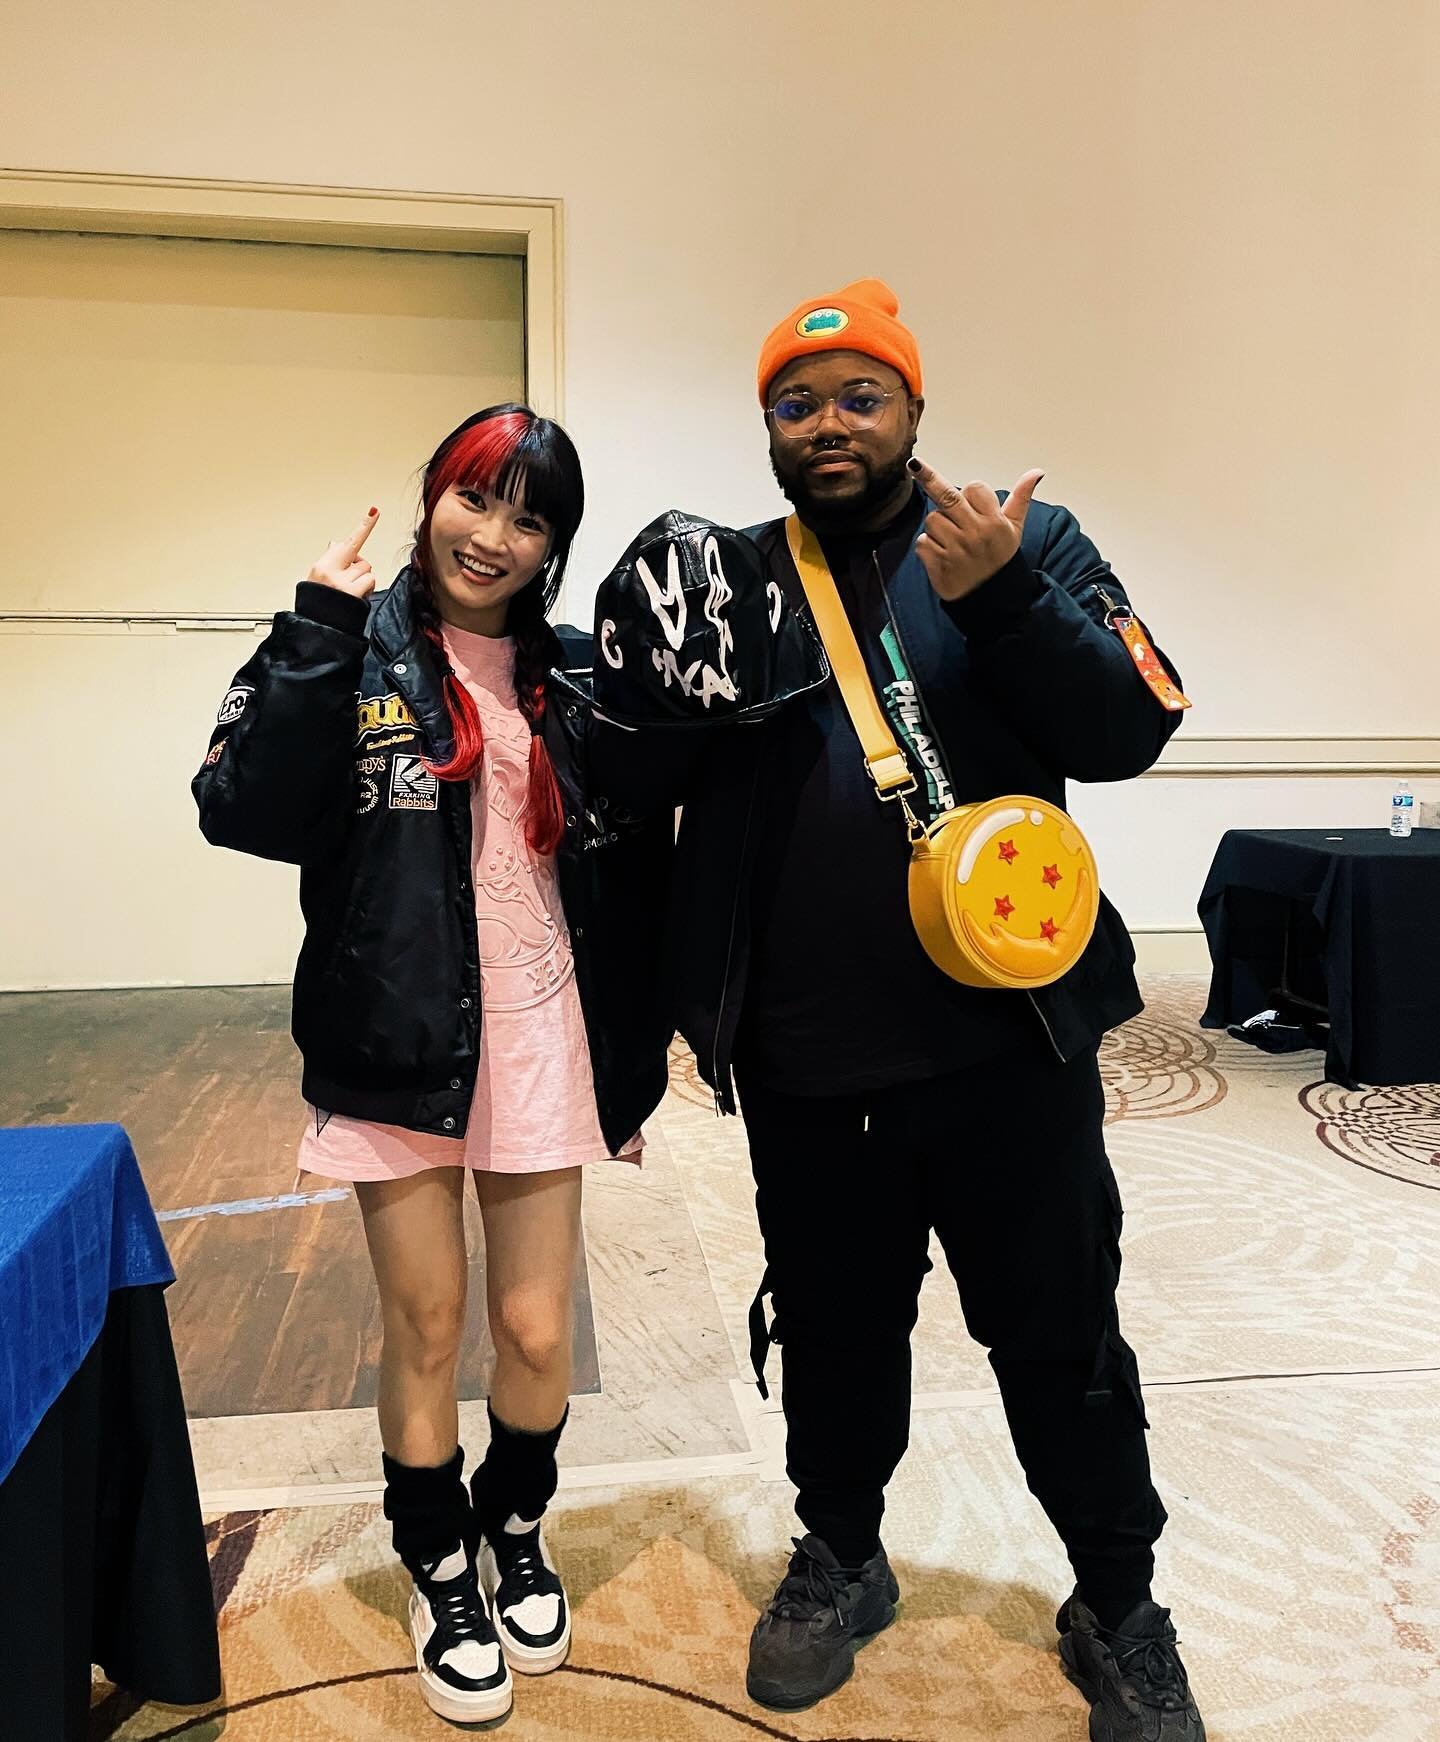 WRESTLEMANIA PHOTO DUMP PT 2

Months ago I set out to connect/interact with independent wrestlers more frequently, and the universe has been giving me everything I could&rsquo;ve wanted.

@makifuckingitoh is one of my FAVORITE wrestlers and an absolu